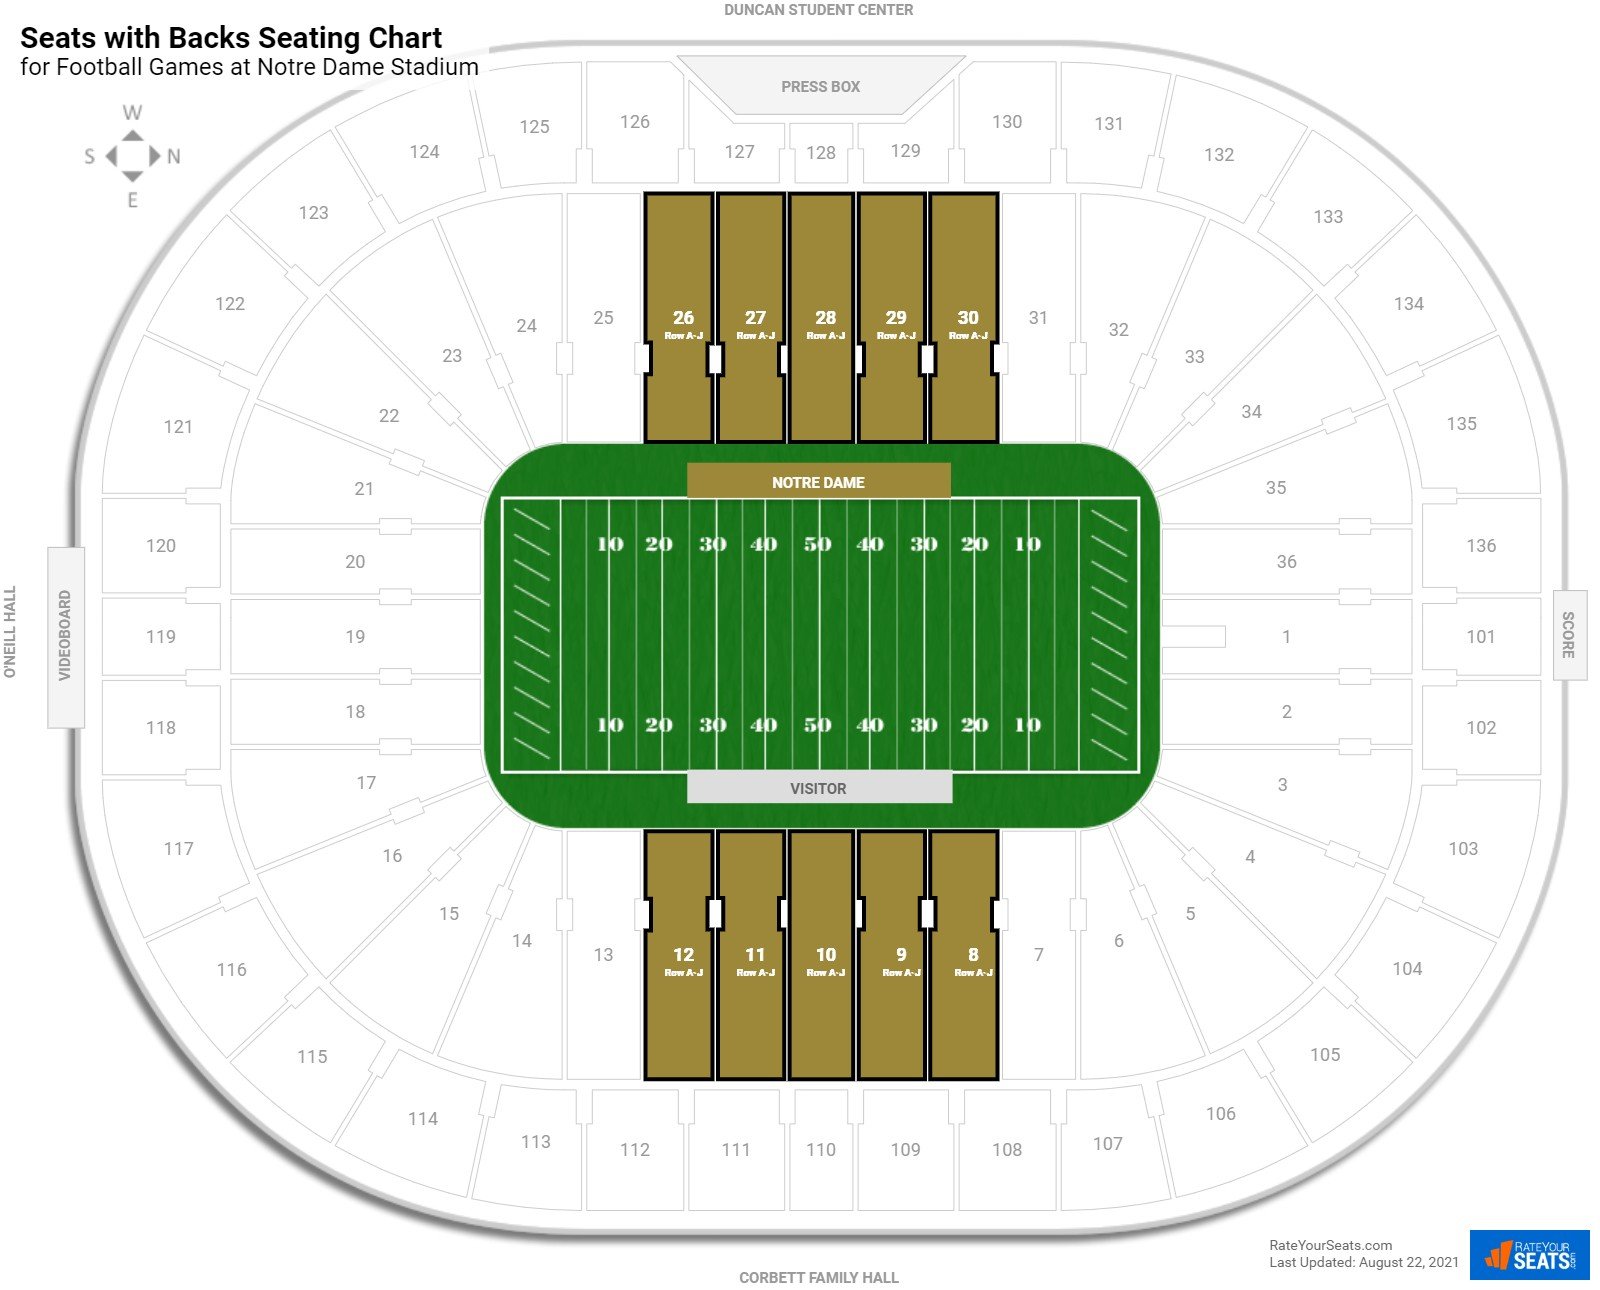 Football Seats with Backs Seating Chart at Notre Dame Stadium